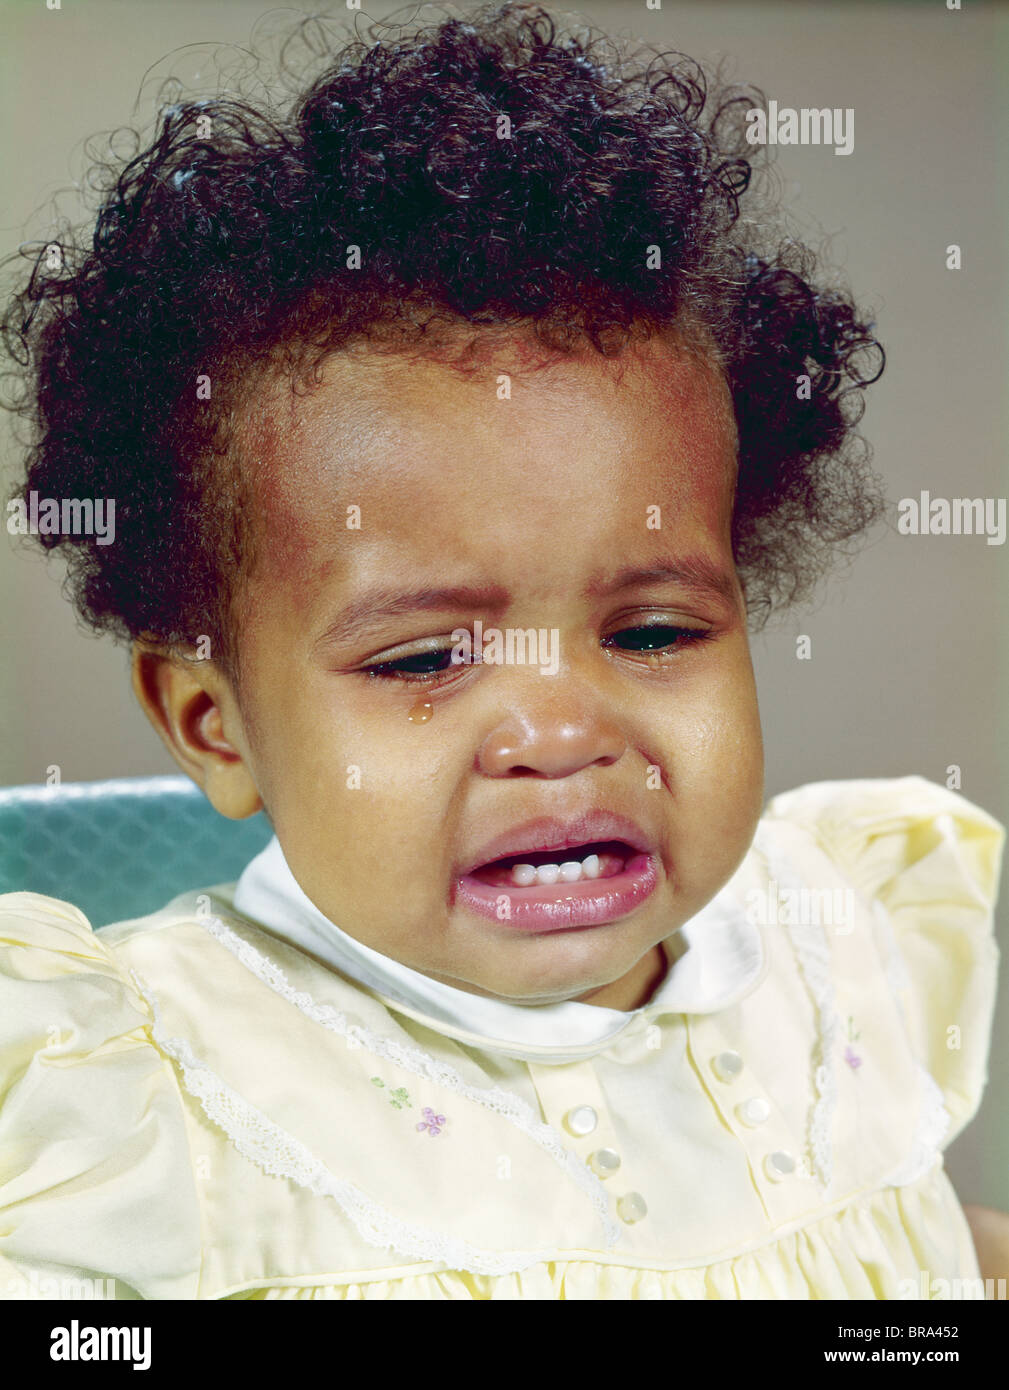 1960s AFRICAN-AMERICAN BABY GIRL CRYING Stock Photo